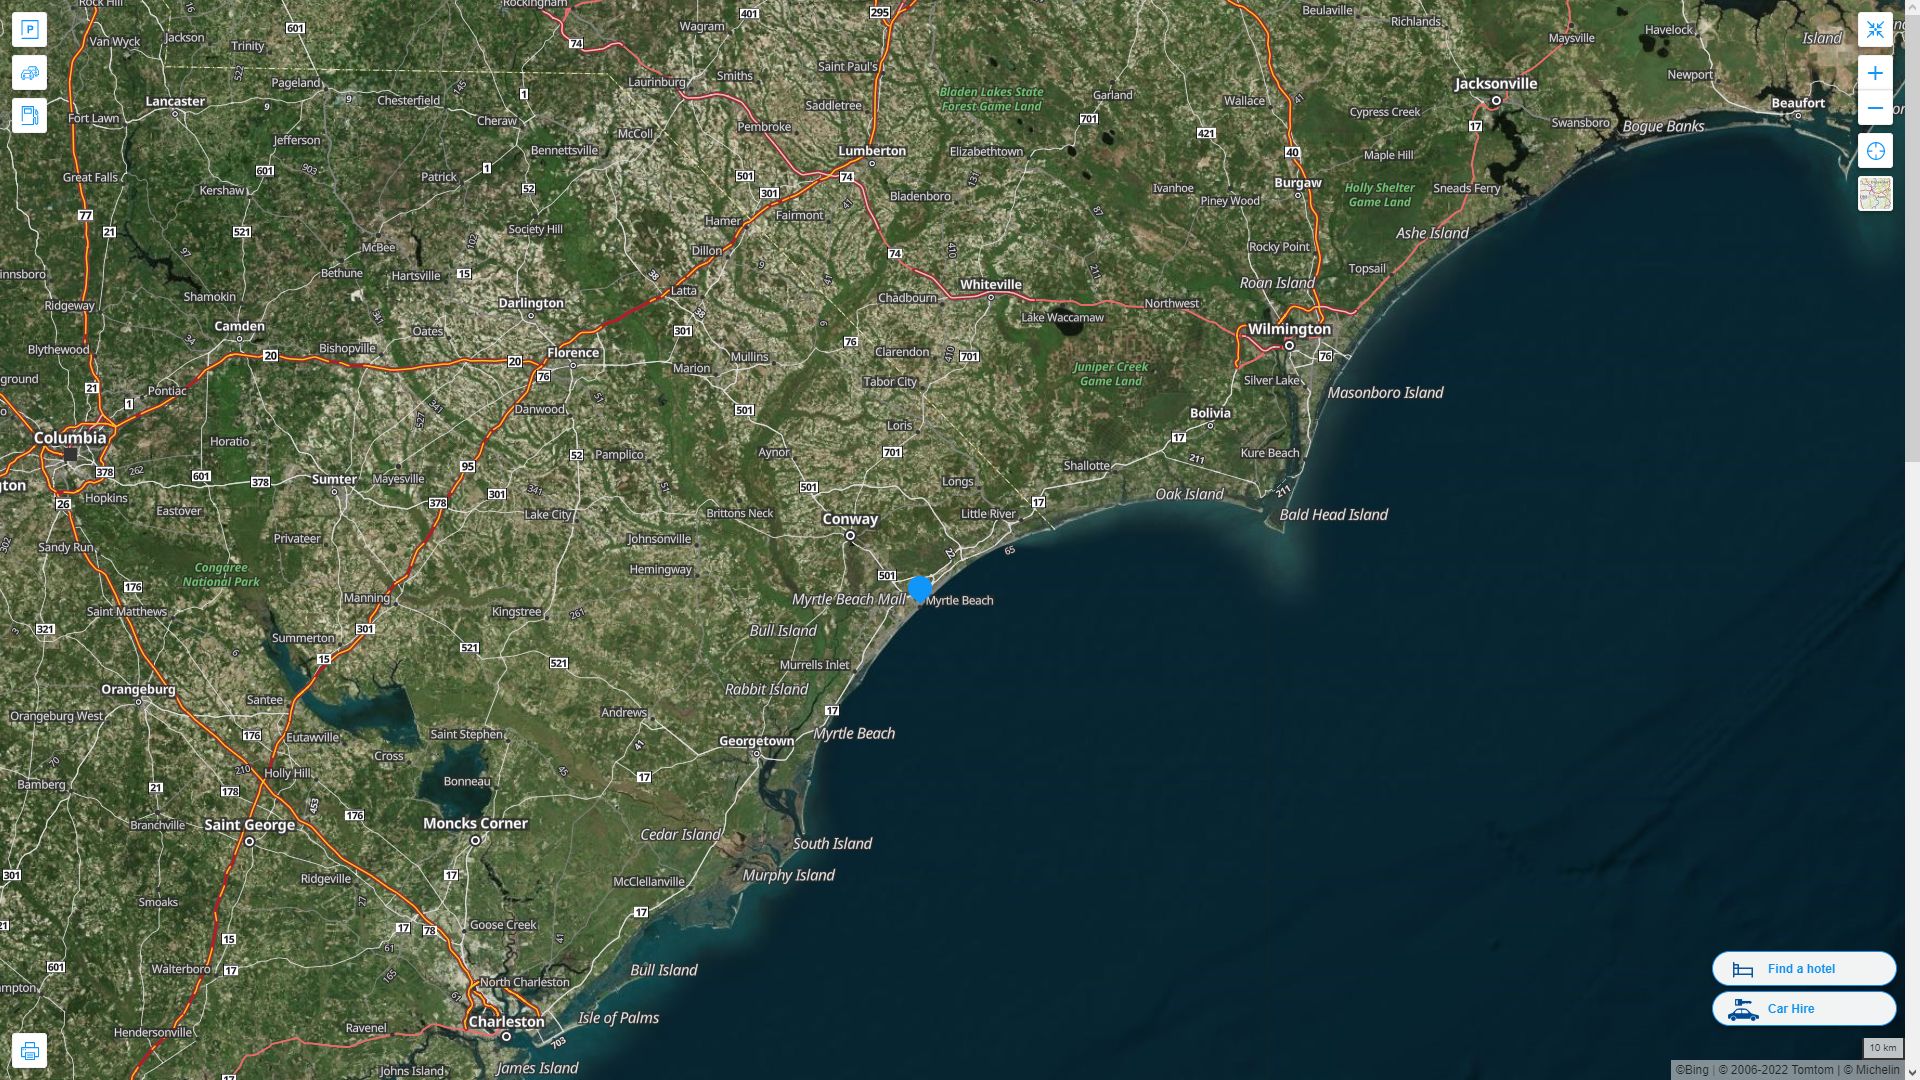 Myrtle Beach South Carolina Highway and Road Map with Satellite View